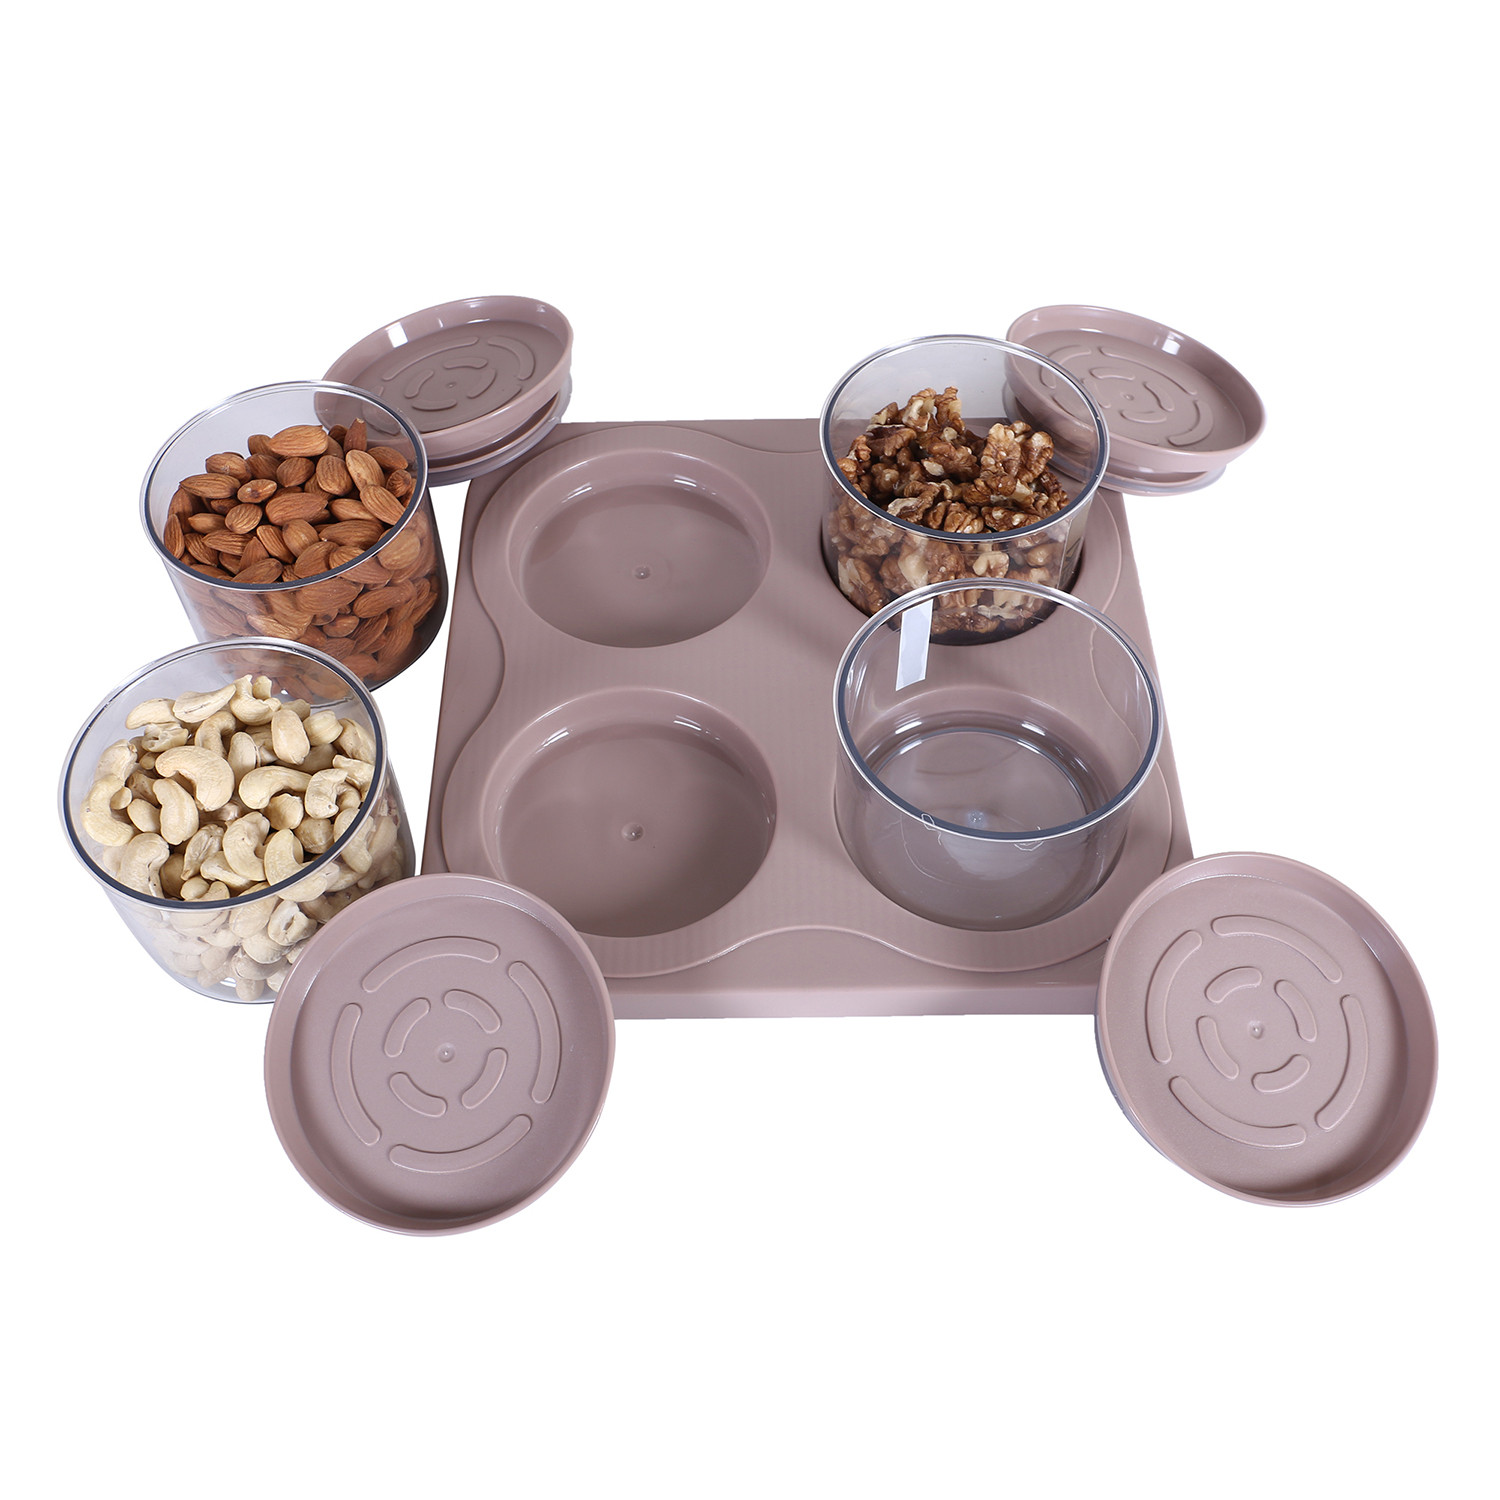 Kuber Industries 4 Containers & Tray Set|Unbreakable Plastic Snackers,Cookies,Nuts Serving Tray|Airtight Containers with Lid,350 ml (Peach)